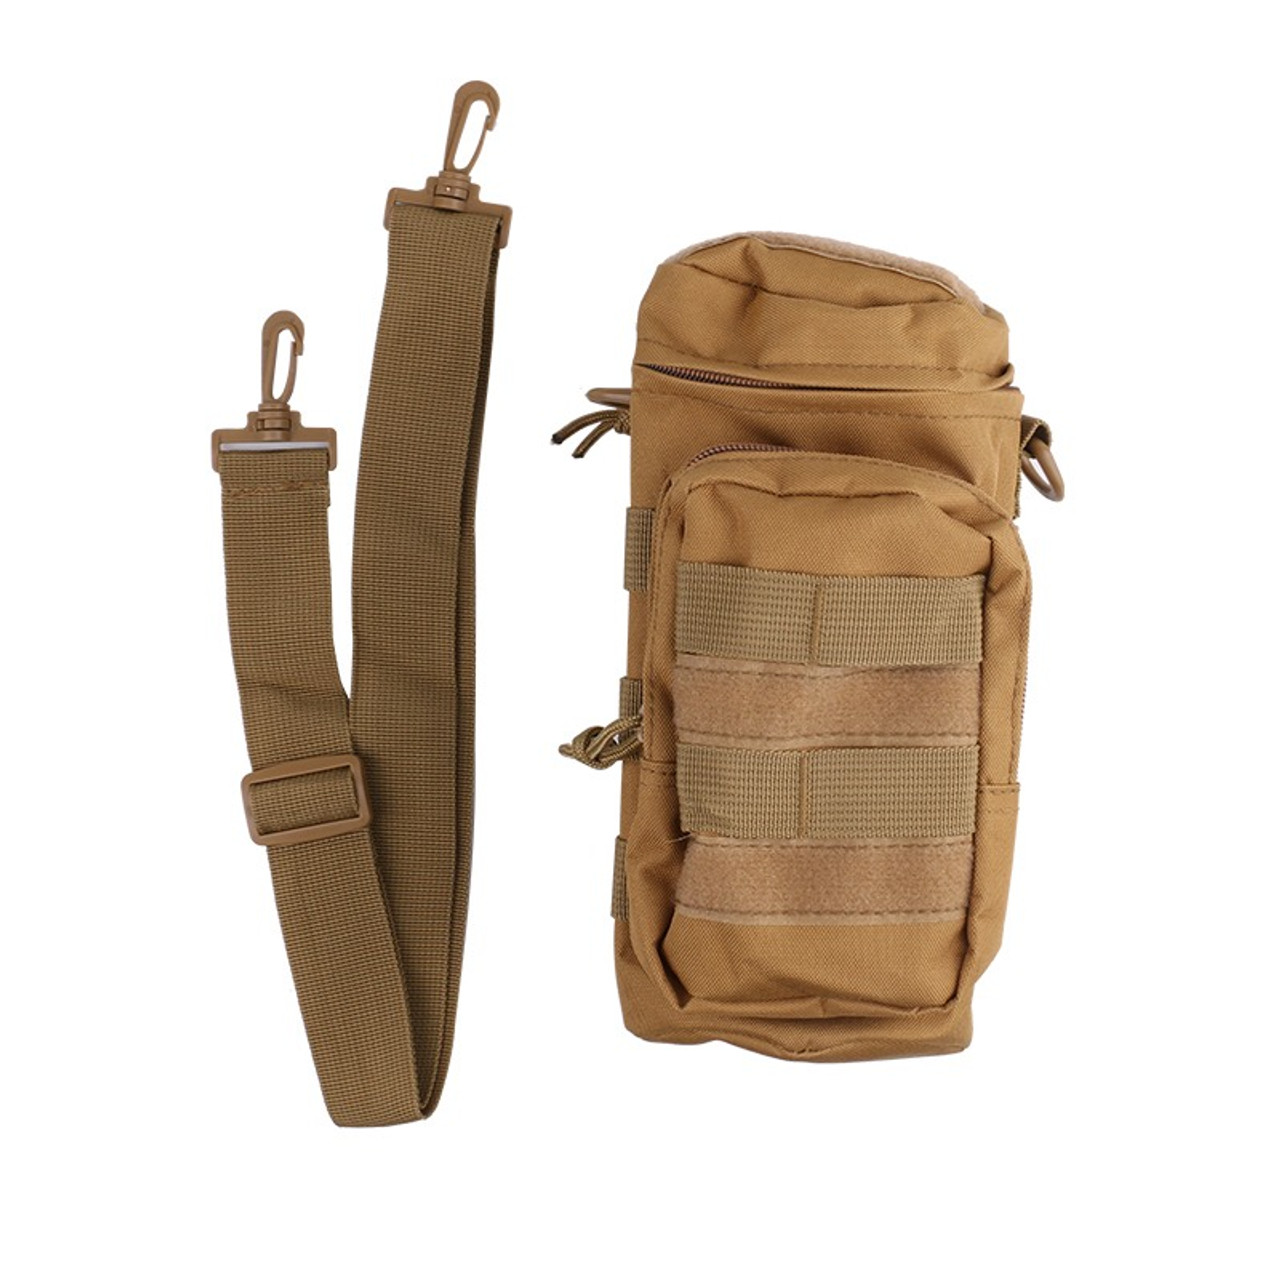 Tactical Water Bottle Holder Hydration Carrier Bag Molle water